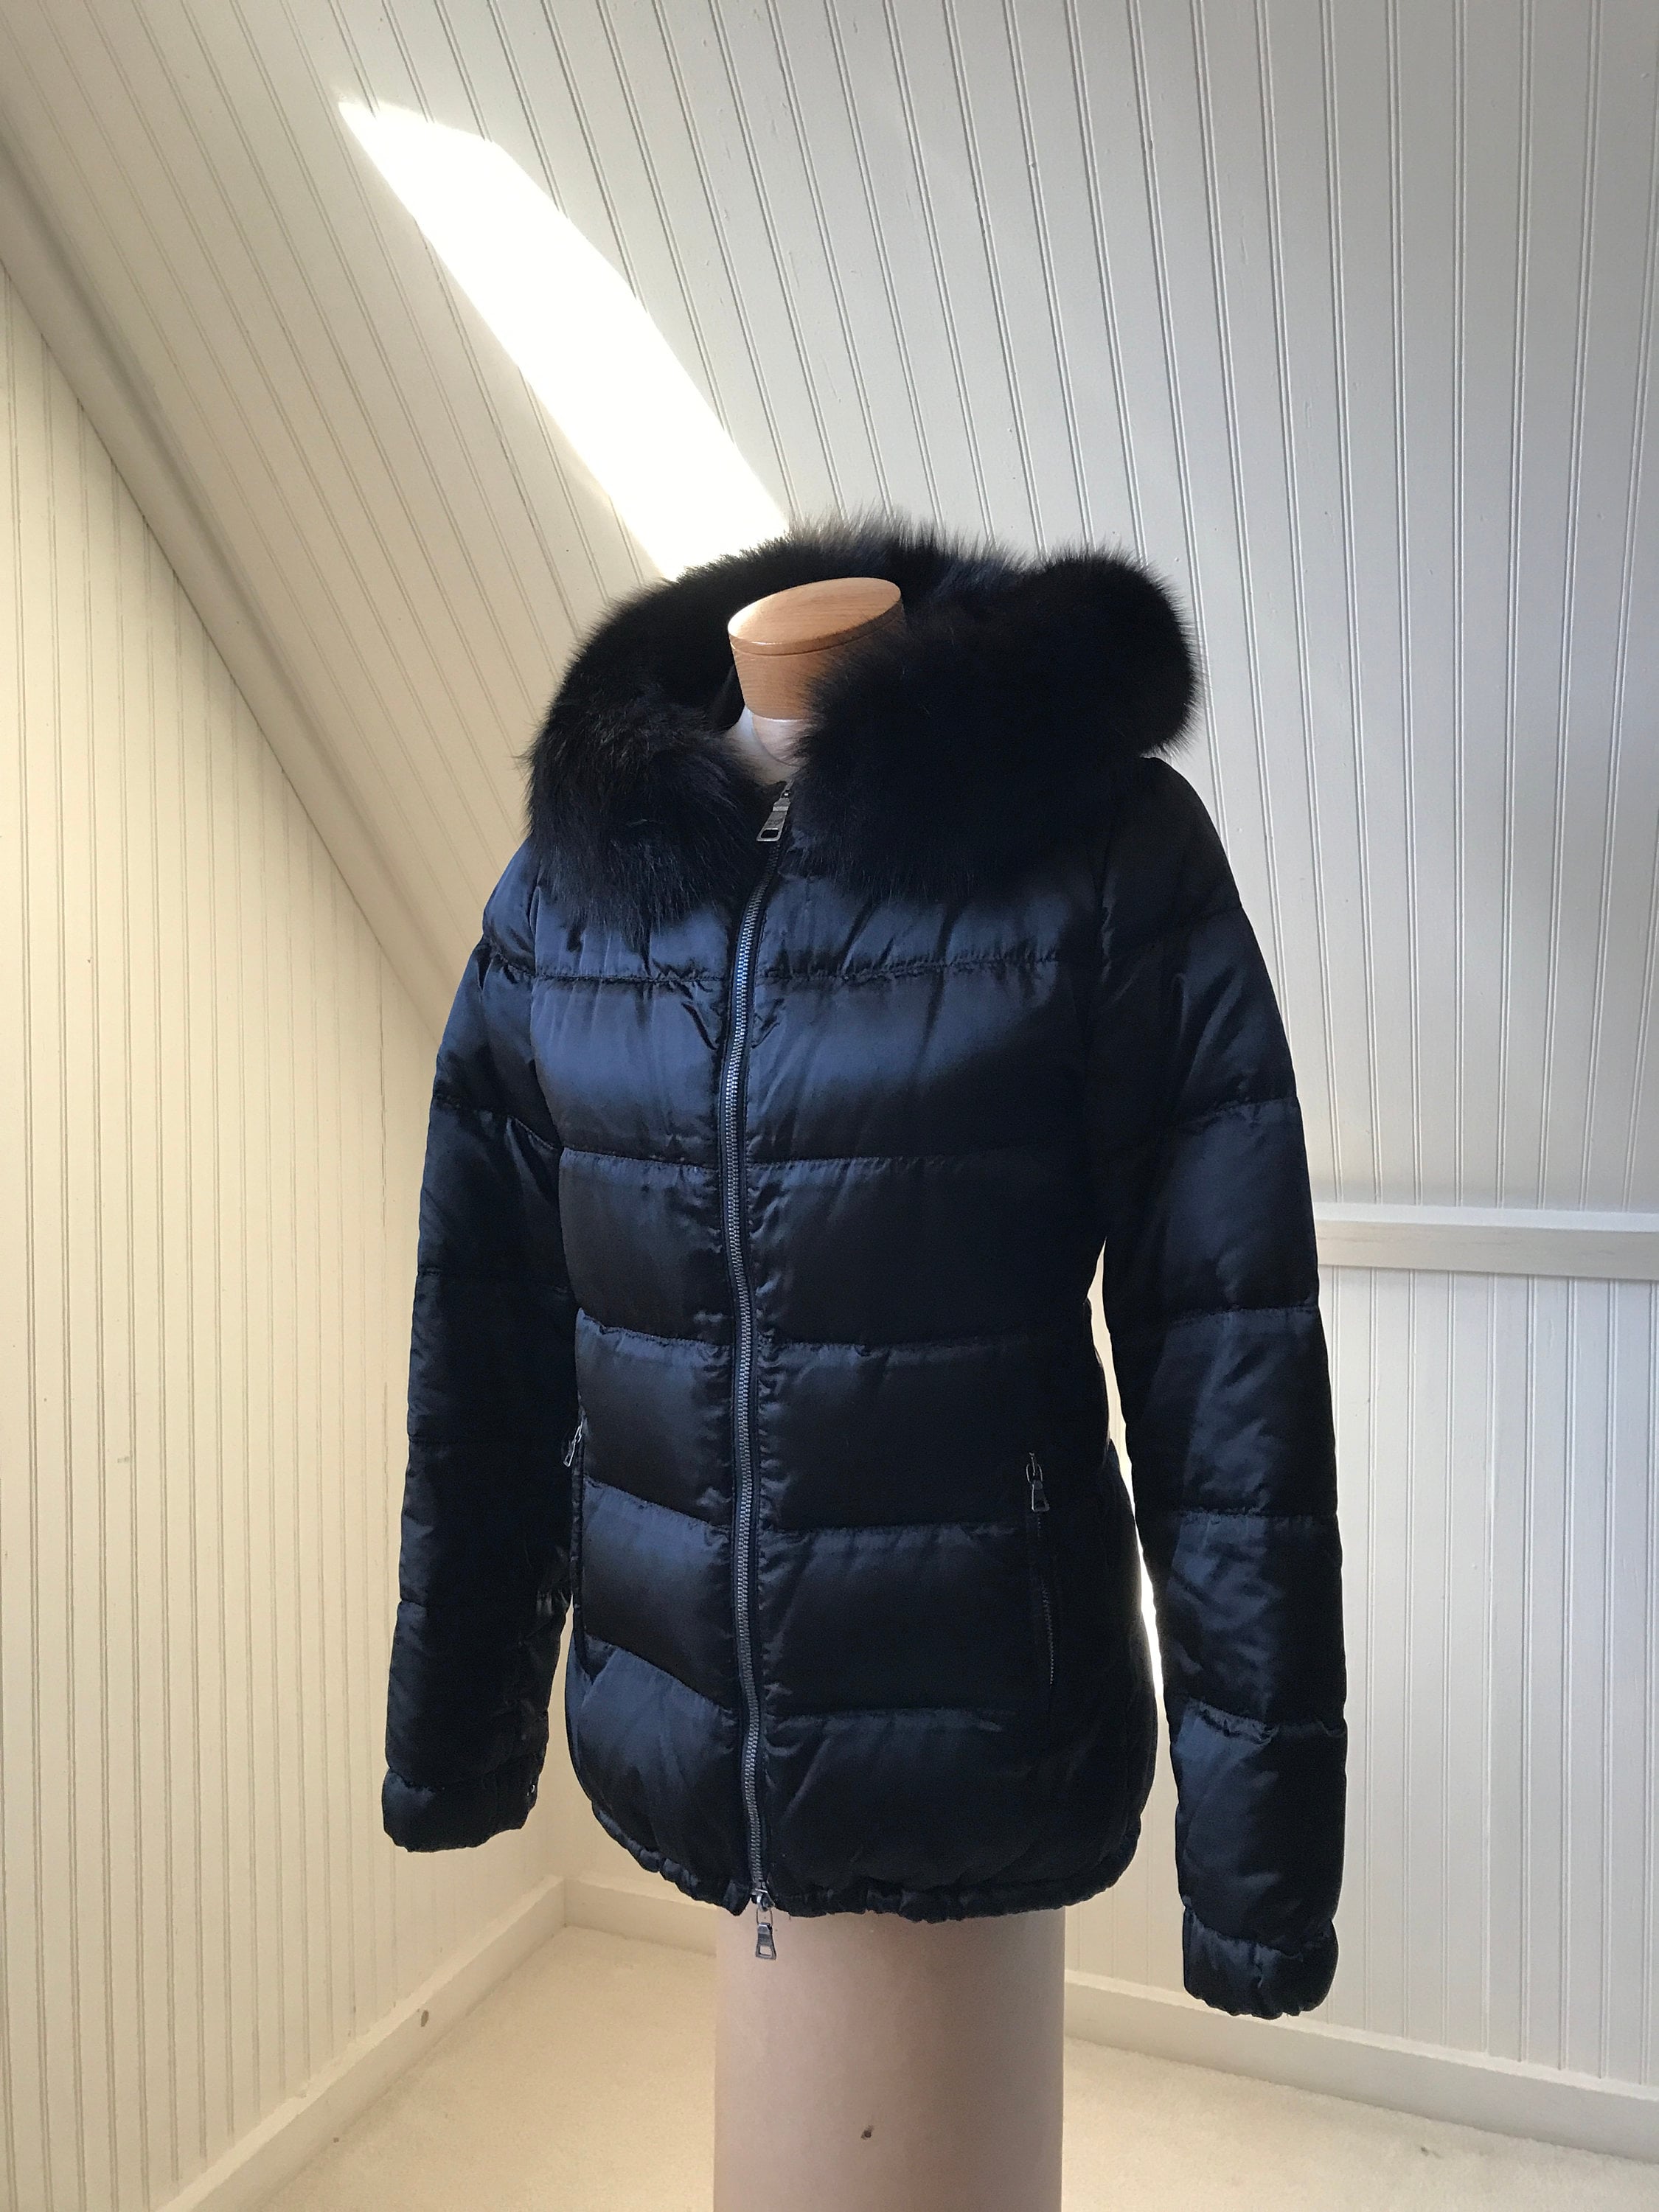 Black Hooded Prada Down Jacket With a Fur Collar and - Etsy